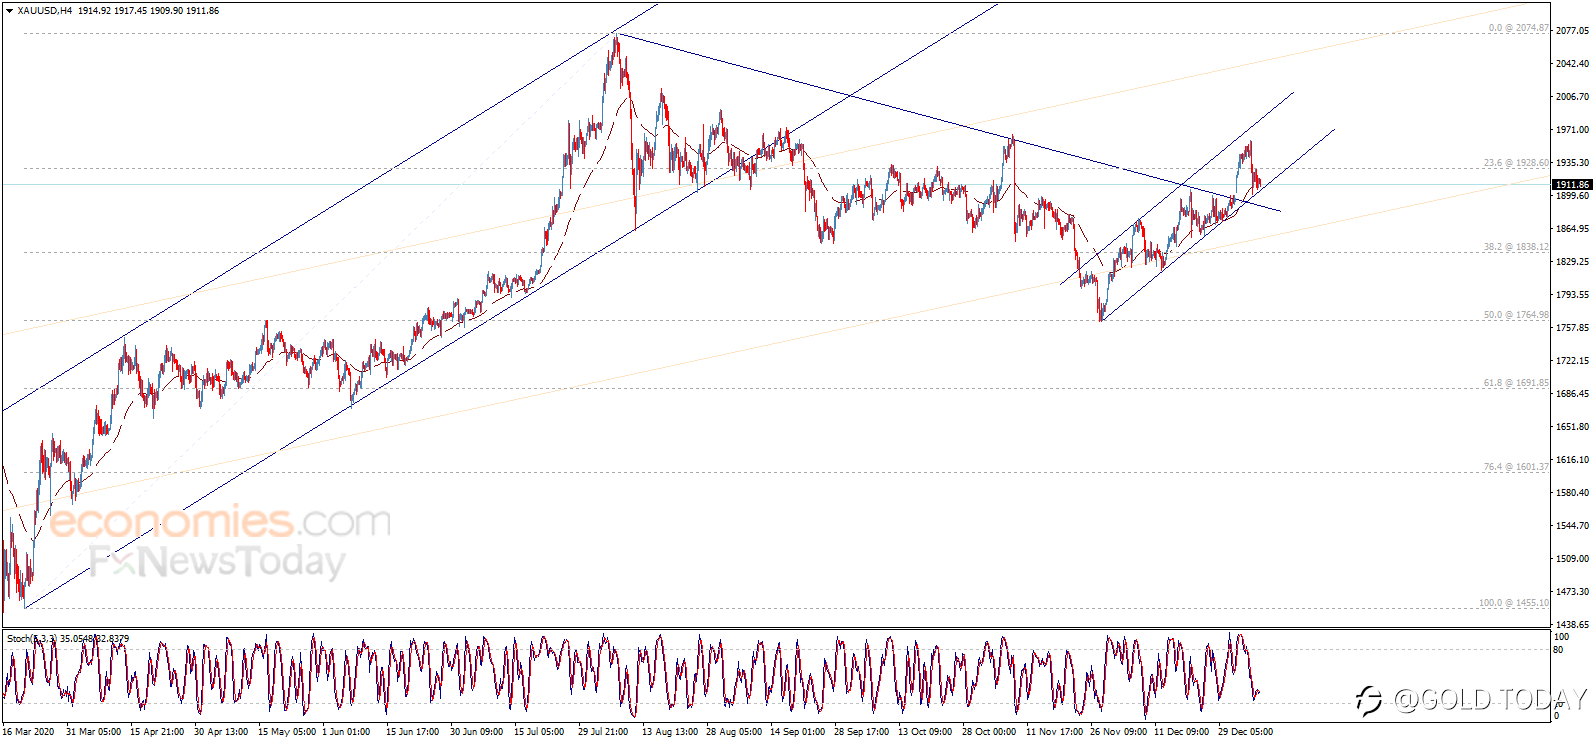 Where Did You Gold? - Bullish Trend Expected for Gold